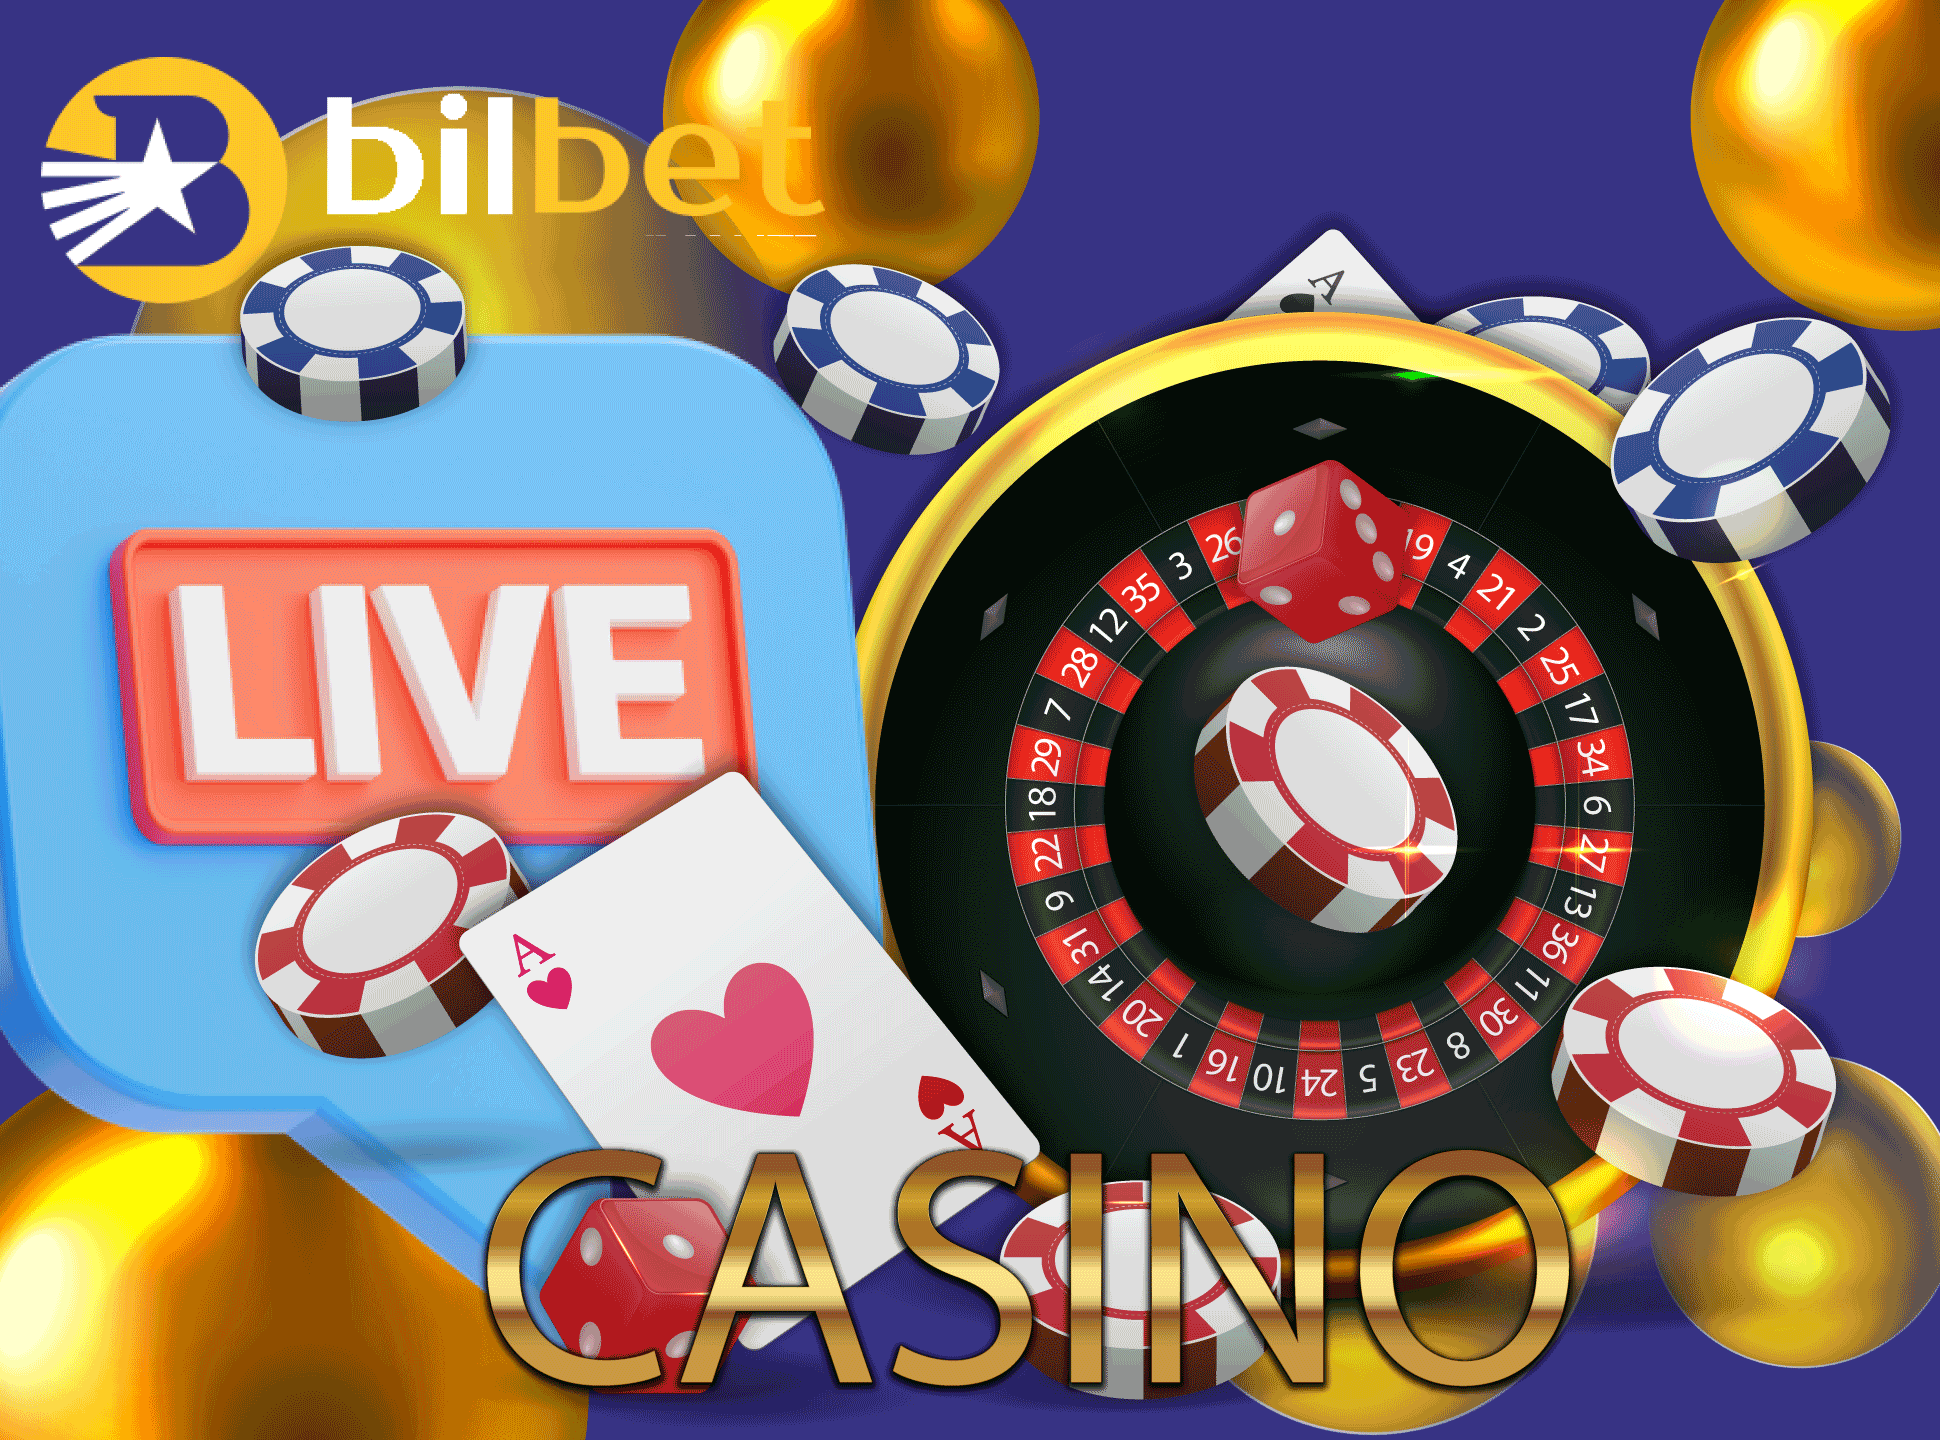 Play casino games against the real dealers.